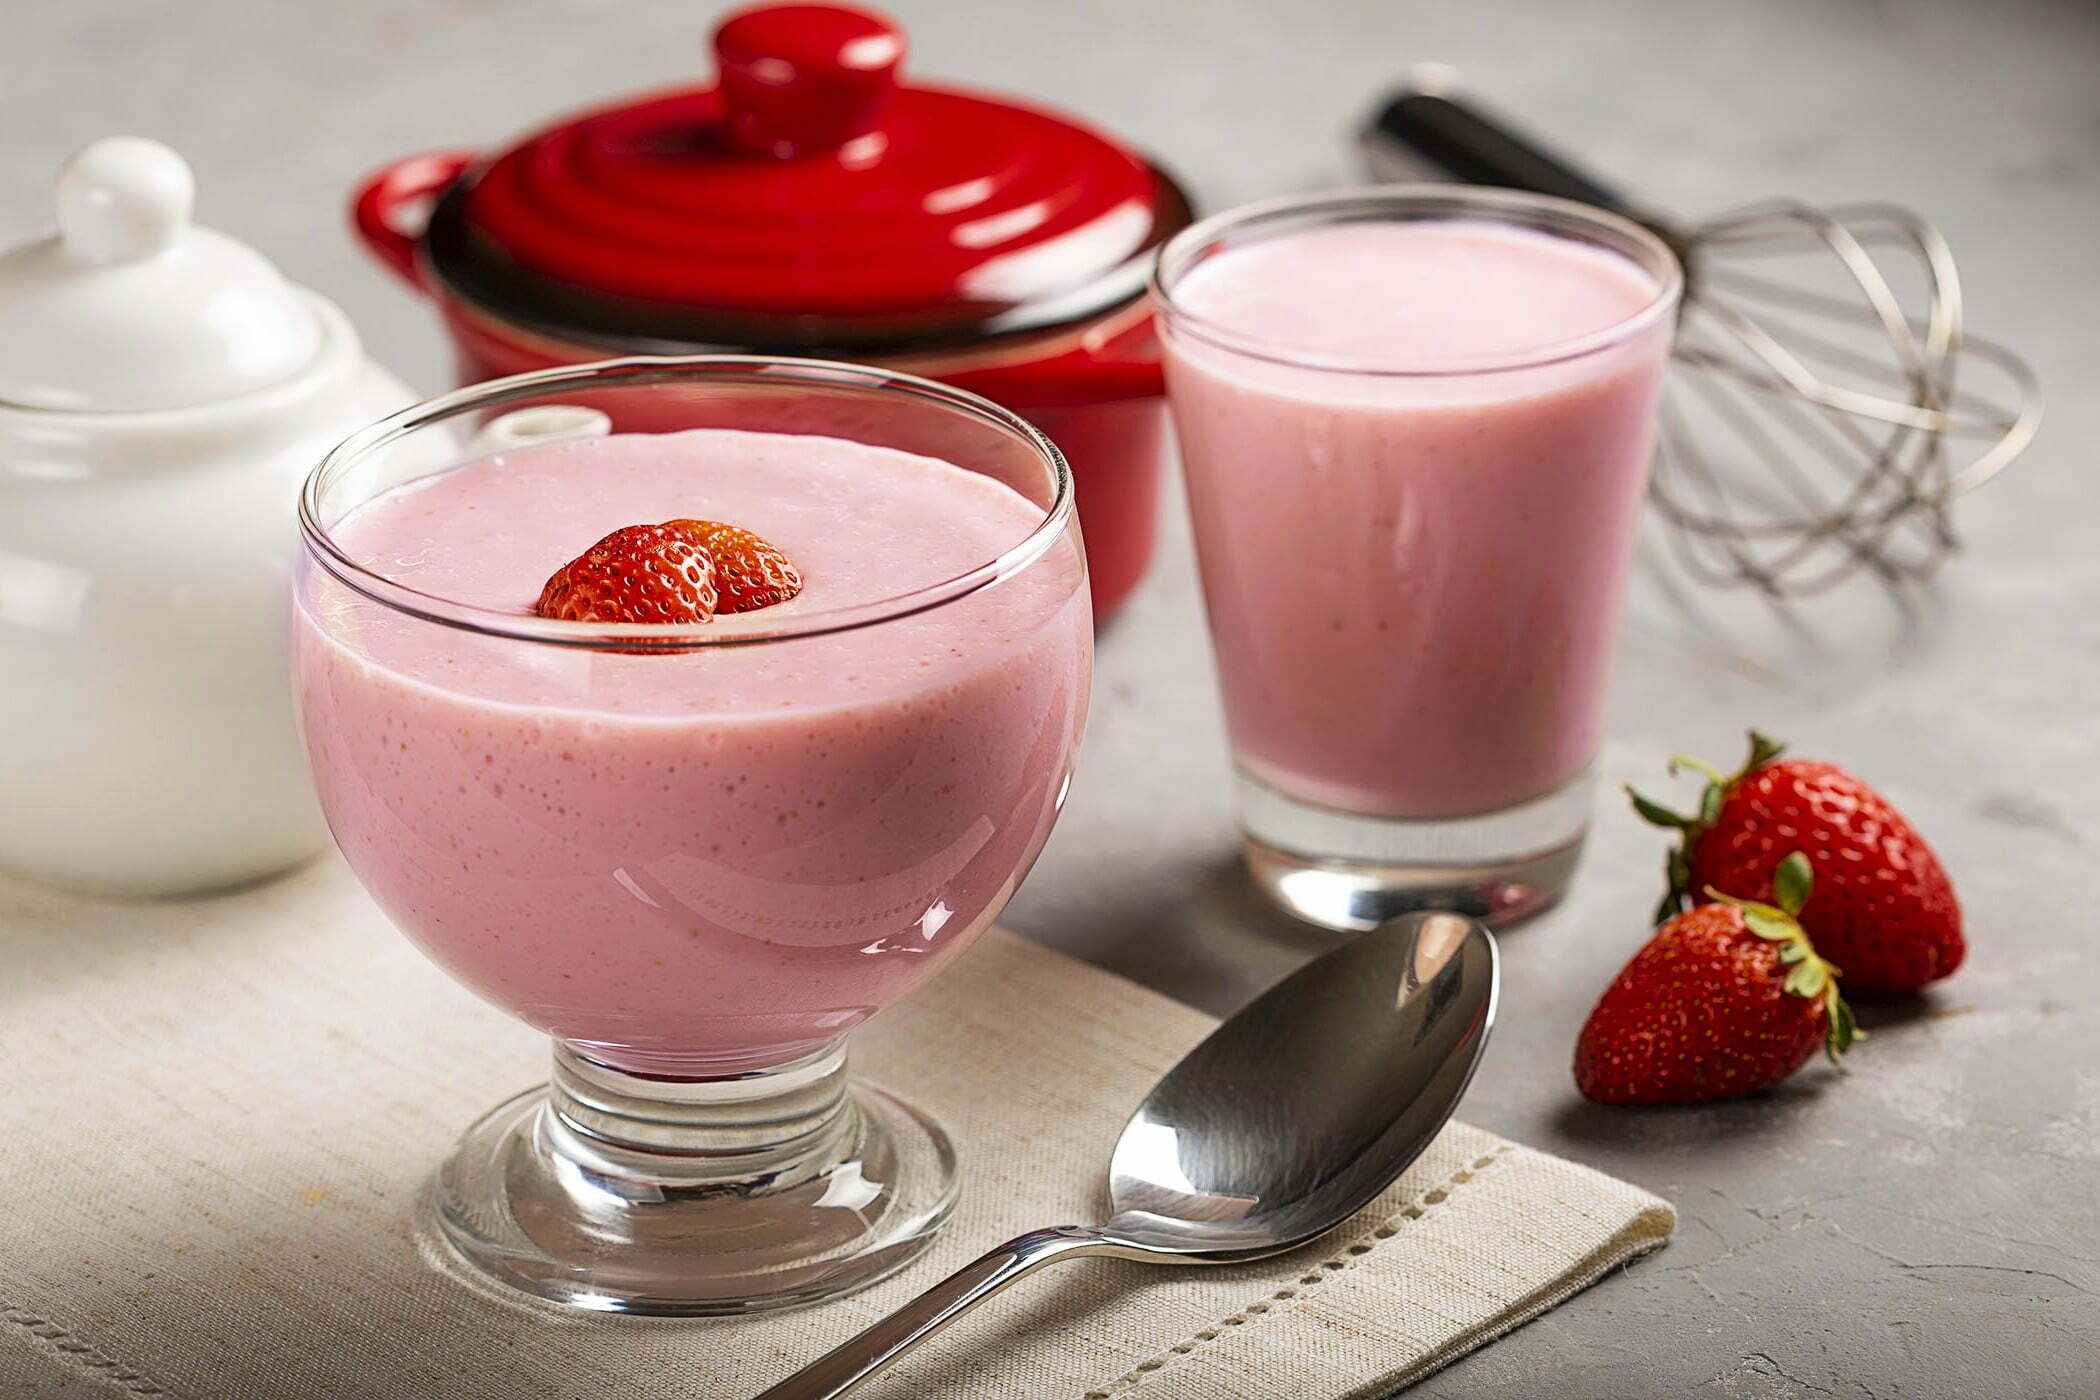 Strawberry Mousse with Gelatin